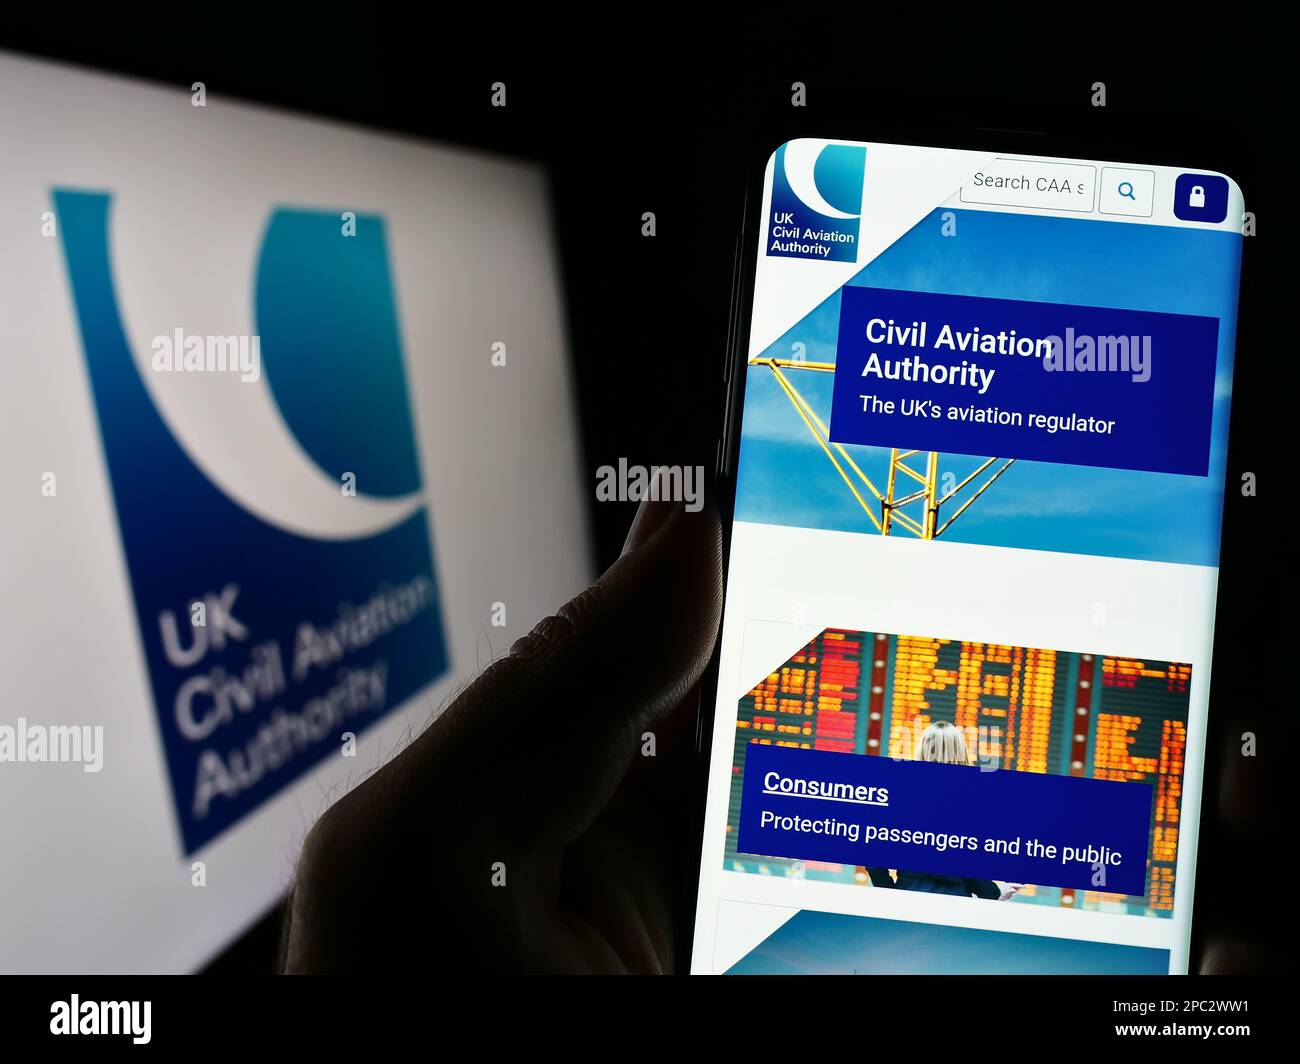 Person holding cellphone with website of British regulator Civil Aviation Authority (CAA) on screen with logo. Focus on center of phone display. Stock Photo